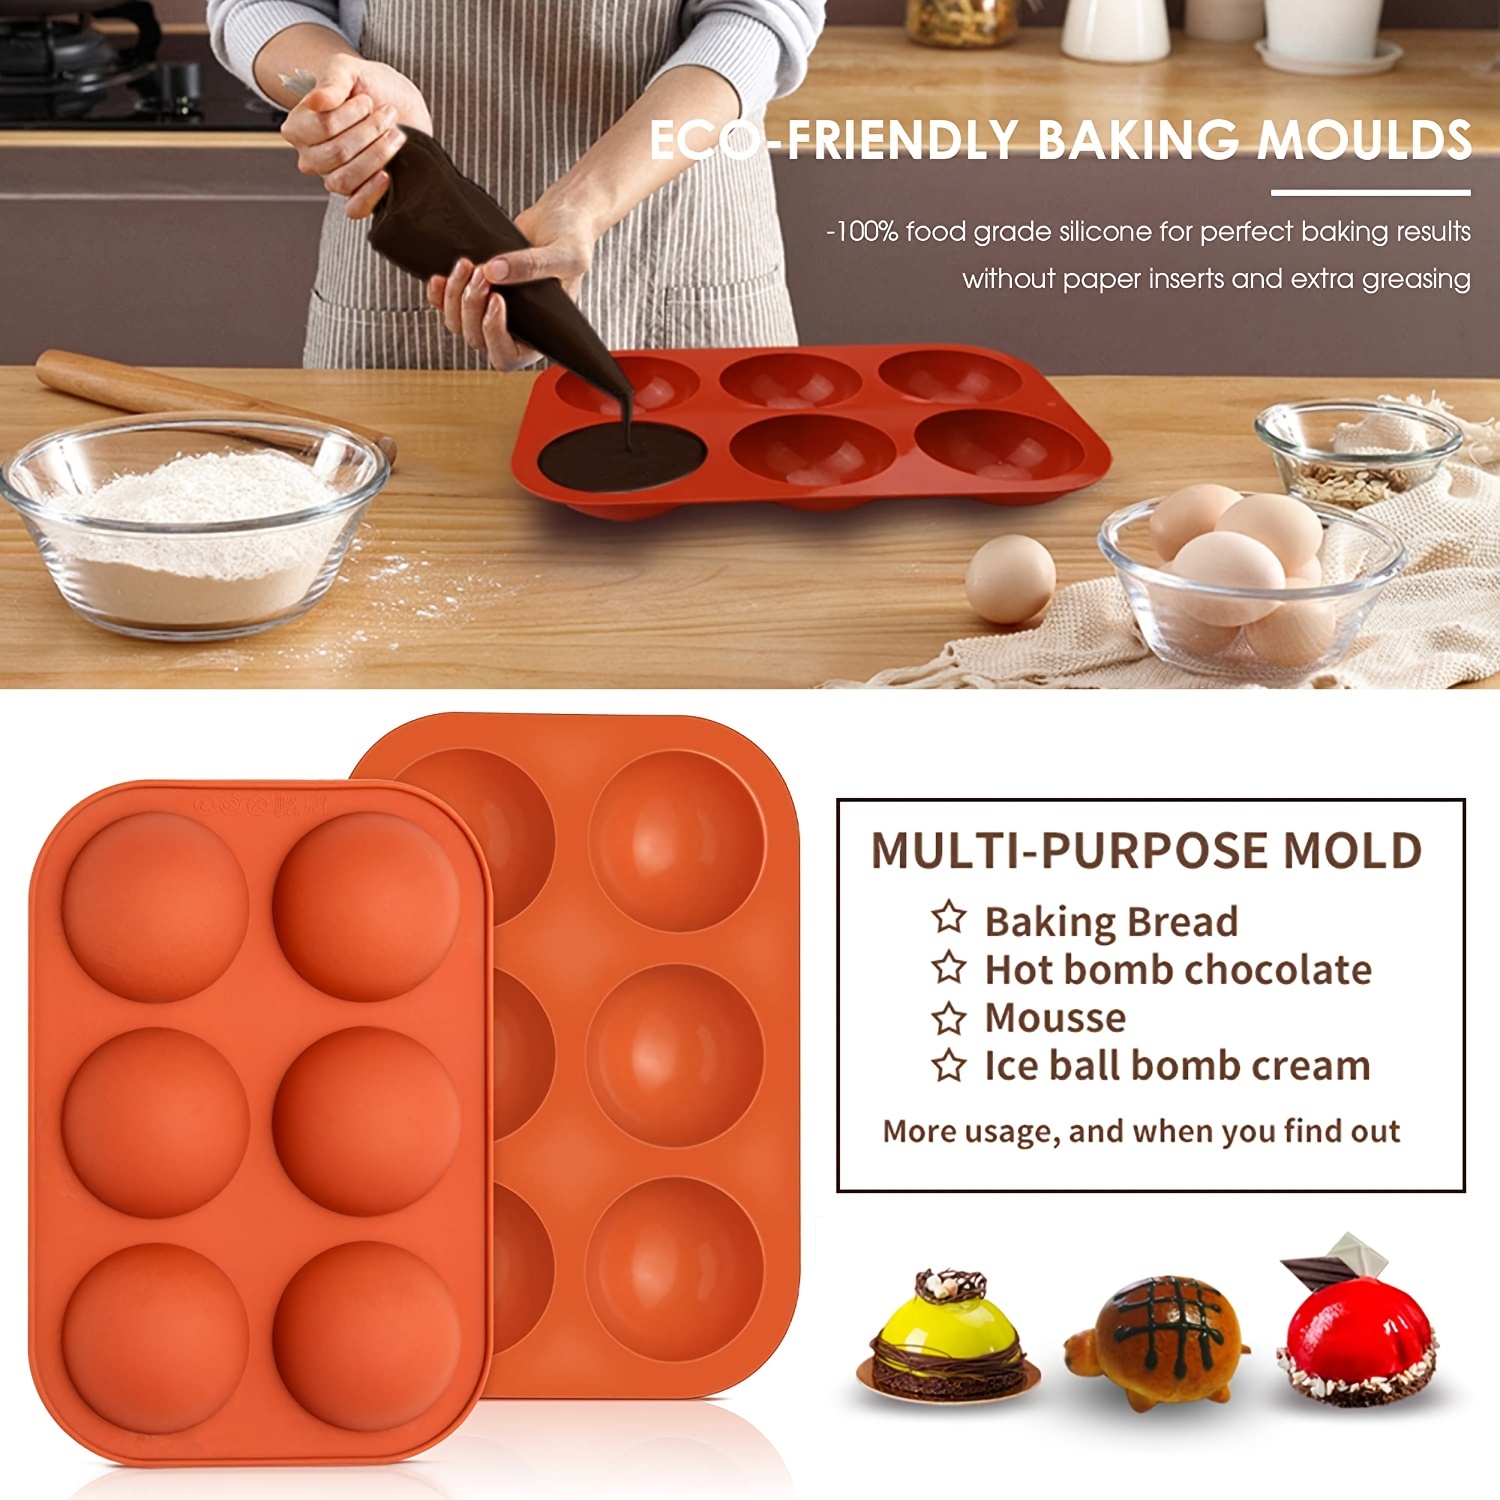 11 Baking with Silicone Molds ideas  silicone molds recipes, silicone molds,  candy recipes